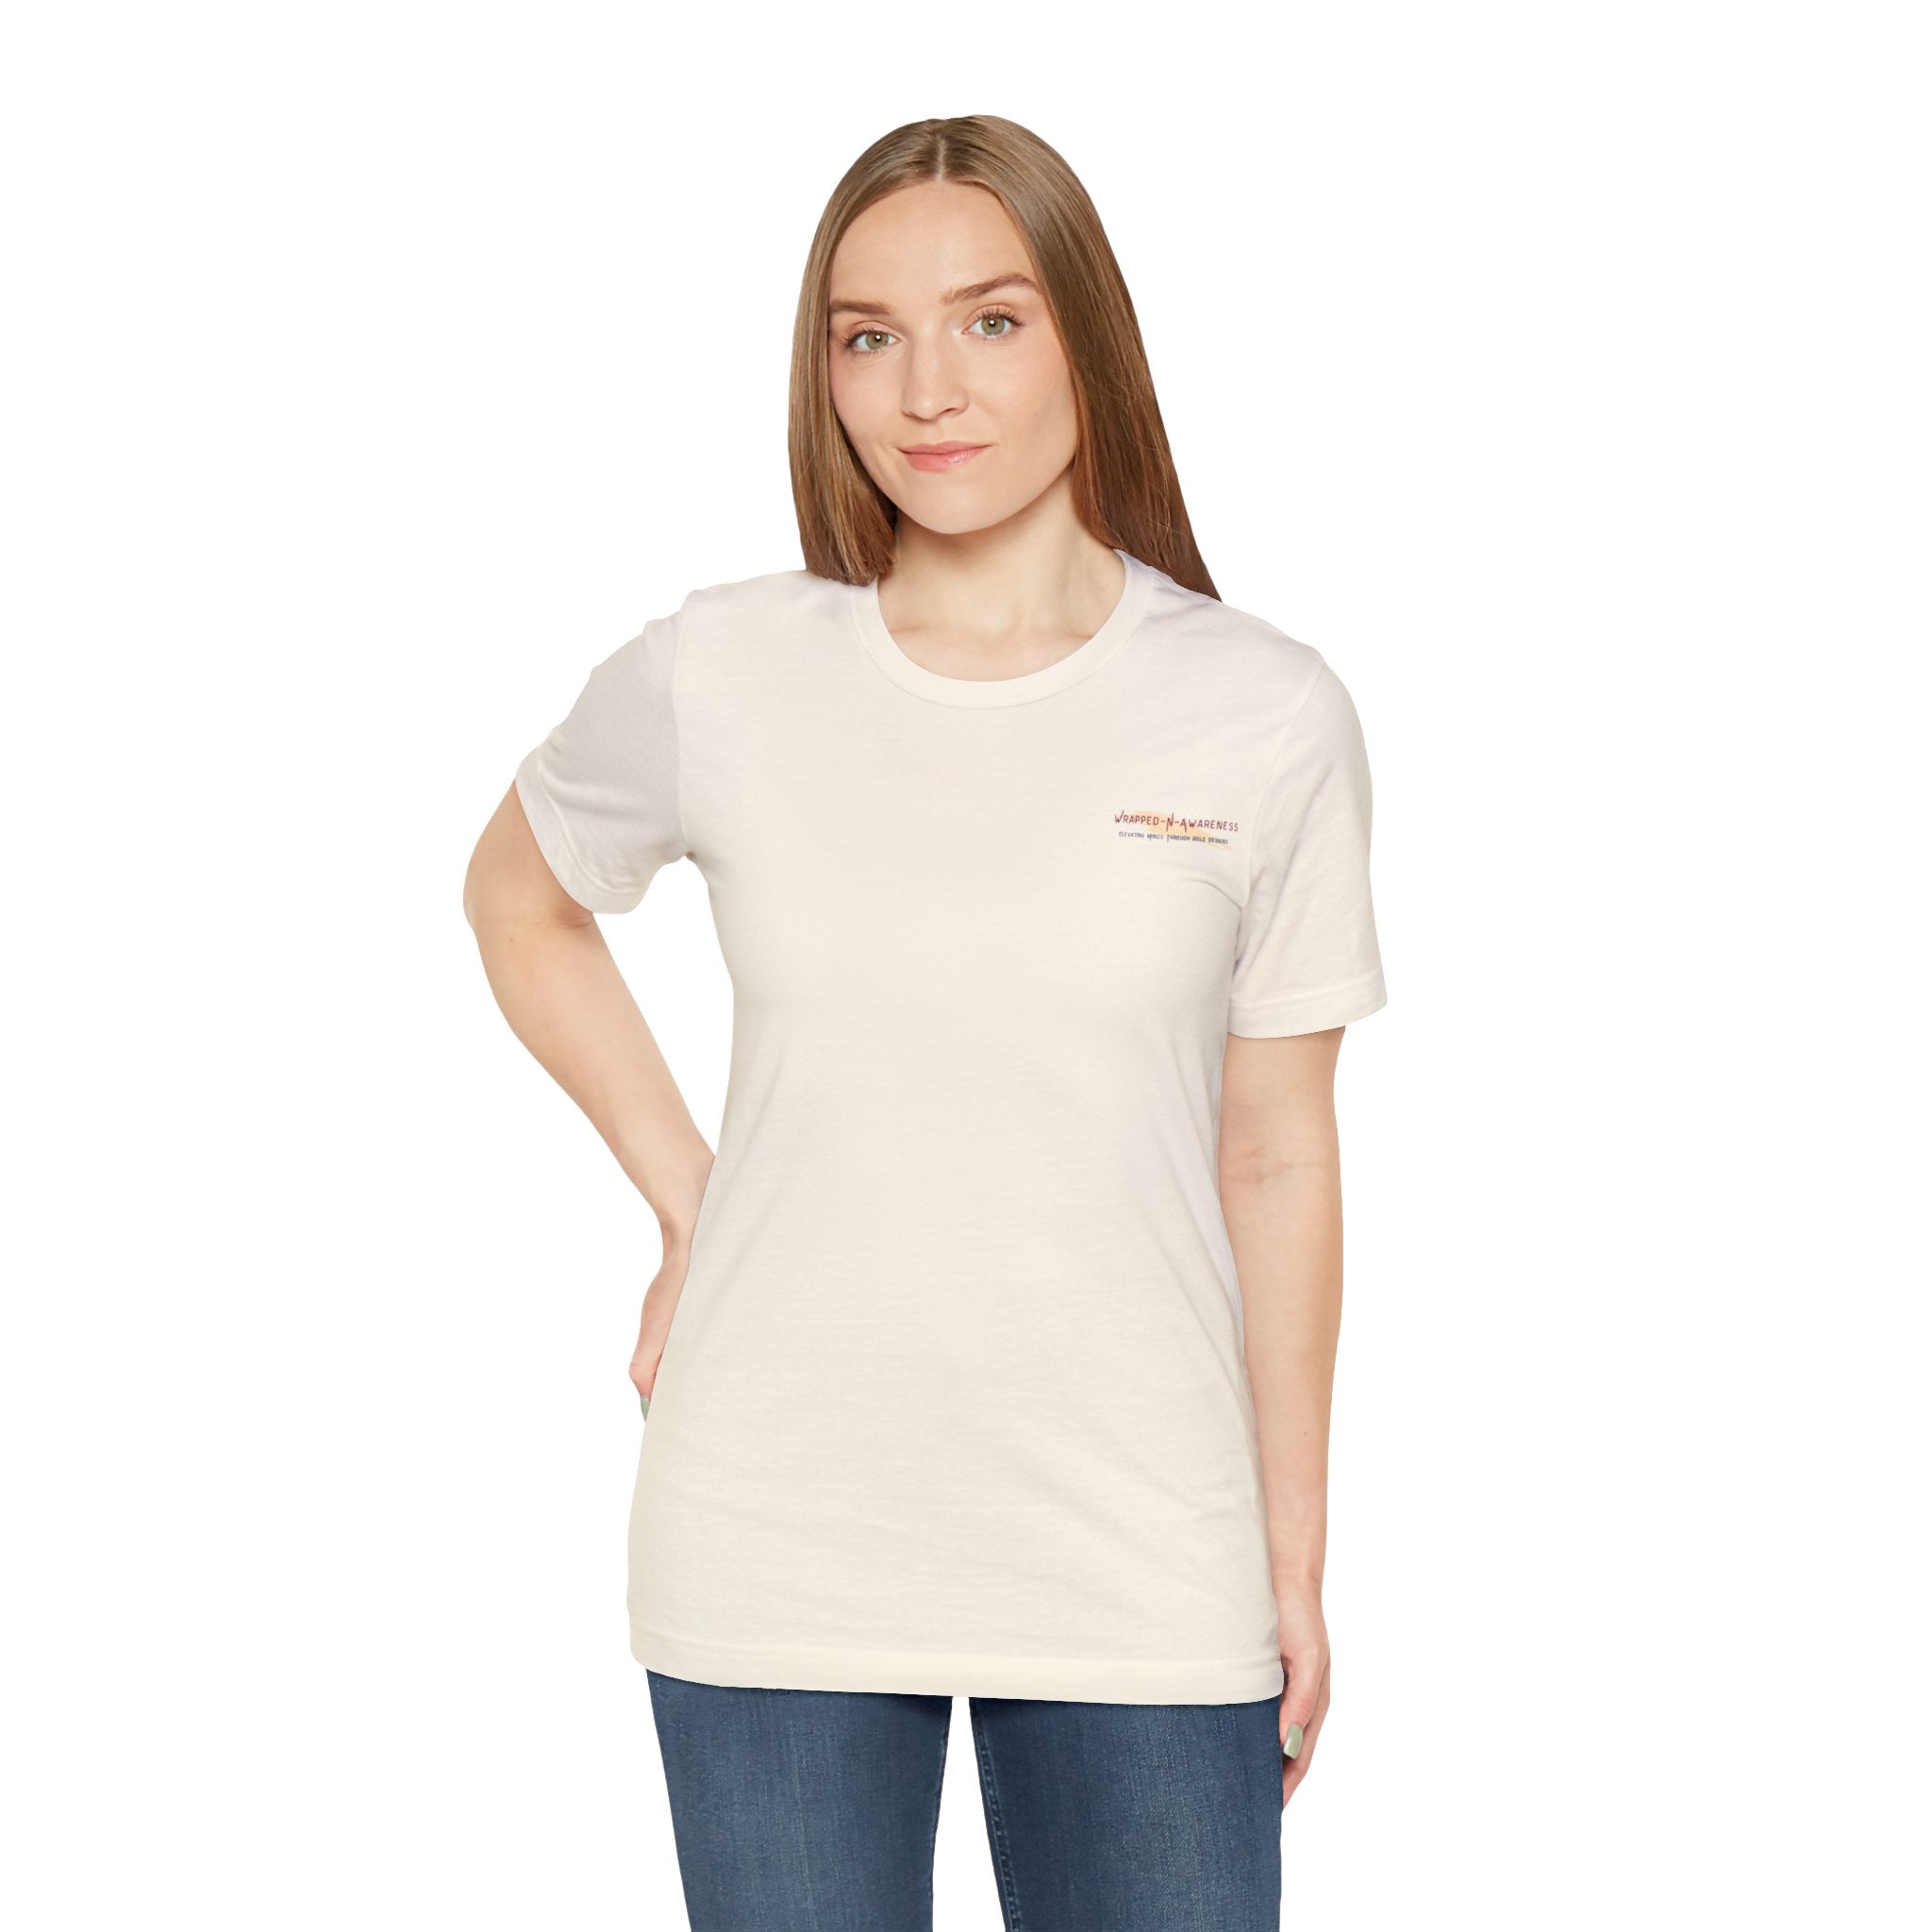 Hope Conquers Fear Jersey Tee - Bella+Canvas 3001 Heather Ice Blue Airlume Cotton Bella+Canvas 3001 Crew Neckline Jersey Short Sleeve Lightweight Fabric Mental Health Support Retail Fit Tear-away Label Tee Unisex Tee T-Shirt 10704475309325804538_2048 Printify